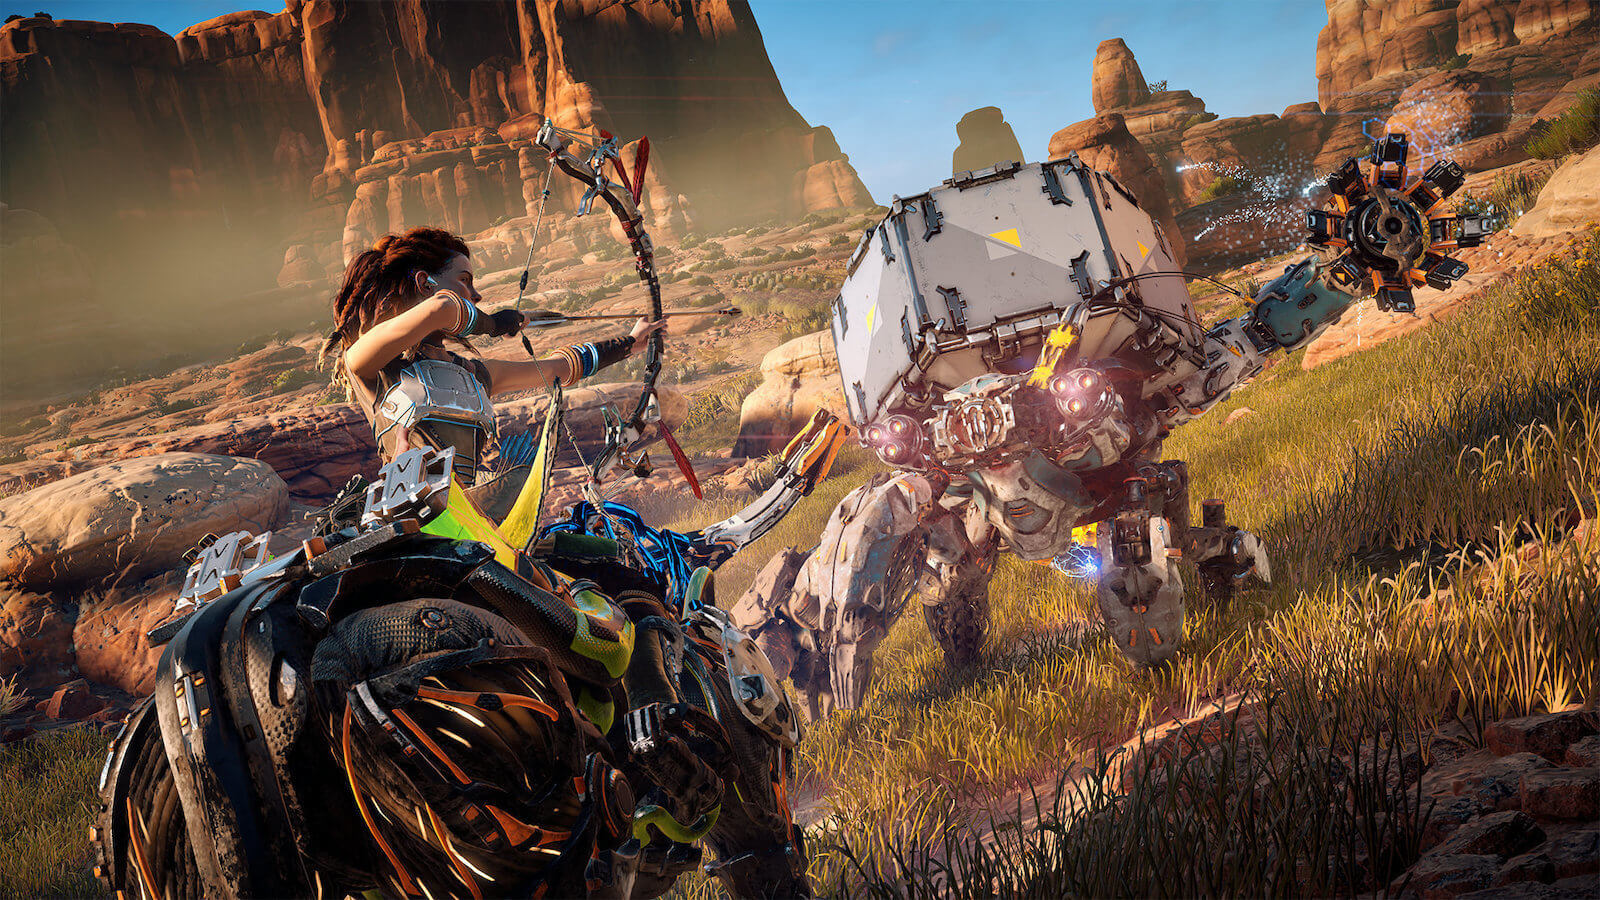 Horizon Zero Dawn Complete Edition Announced As Arriving To GOG On November 24